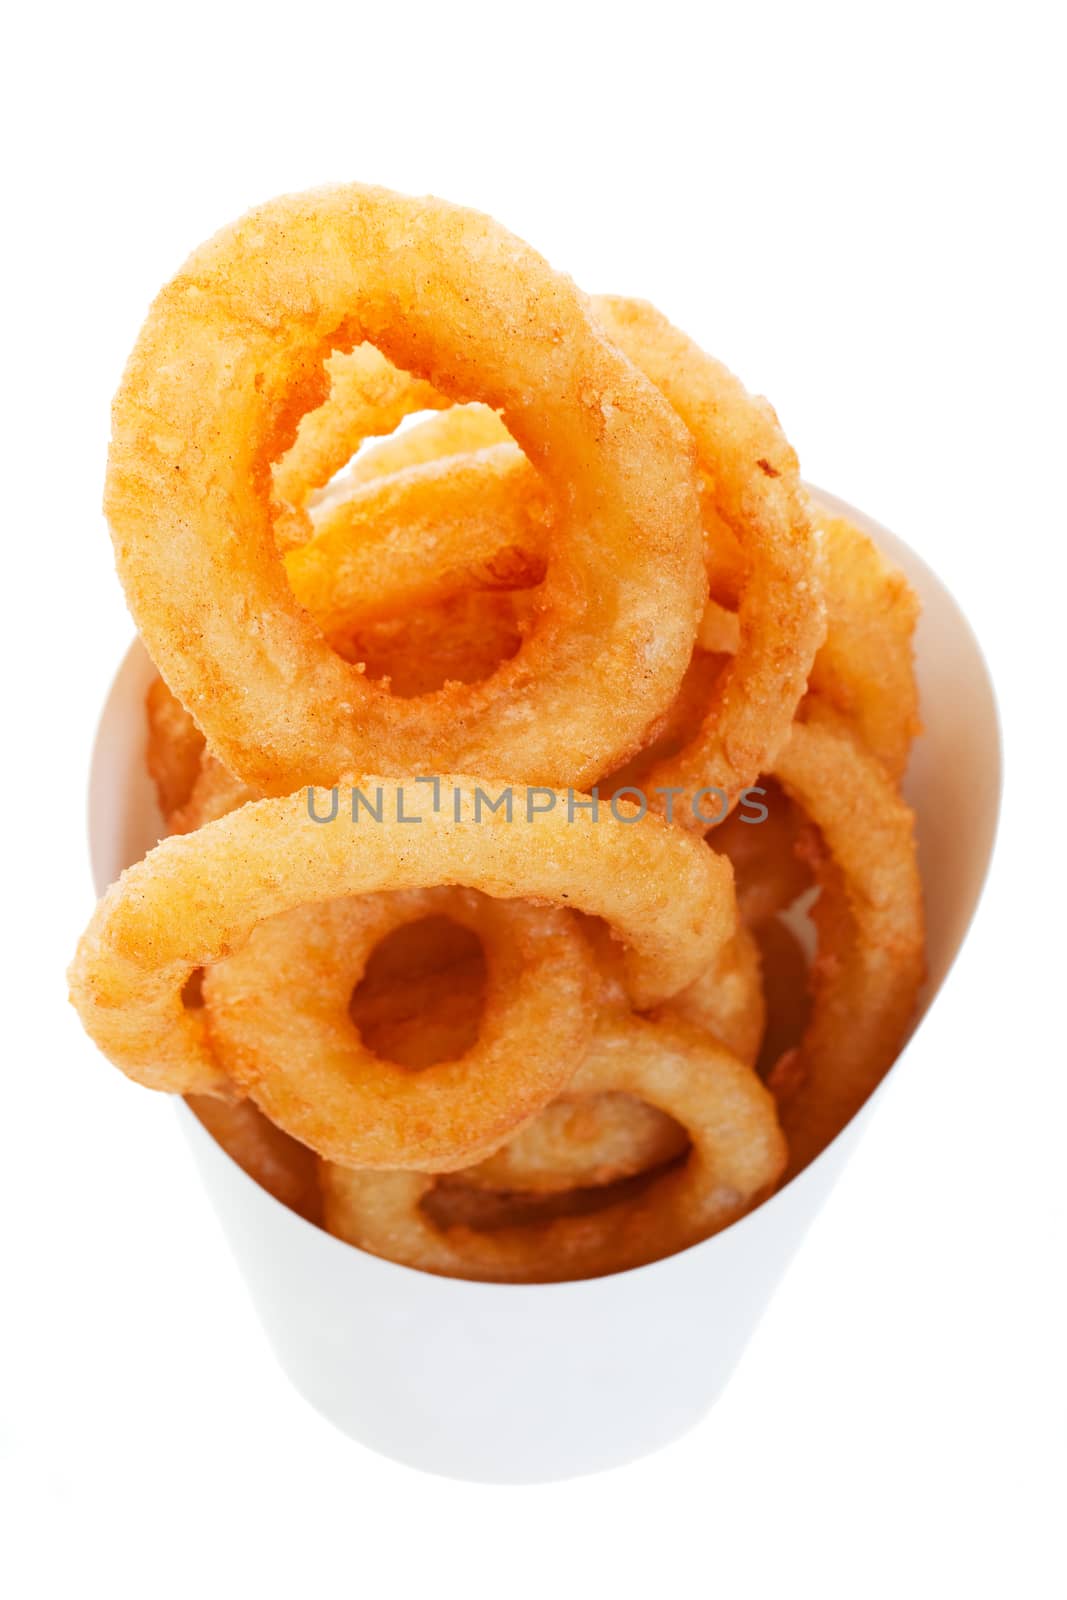 Golden brown, deep fried onion rings in a generic takeout container.  Shot on white background.